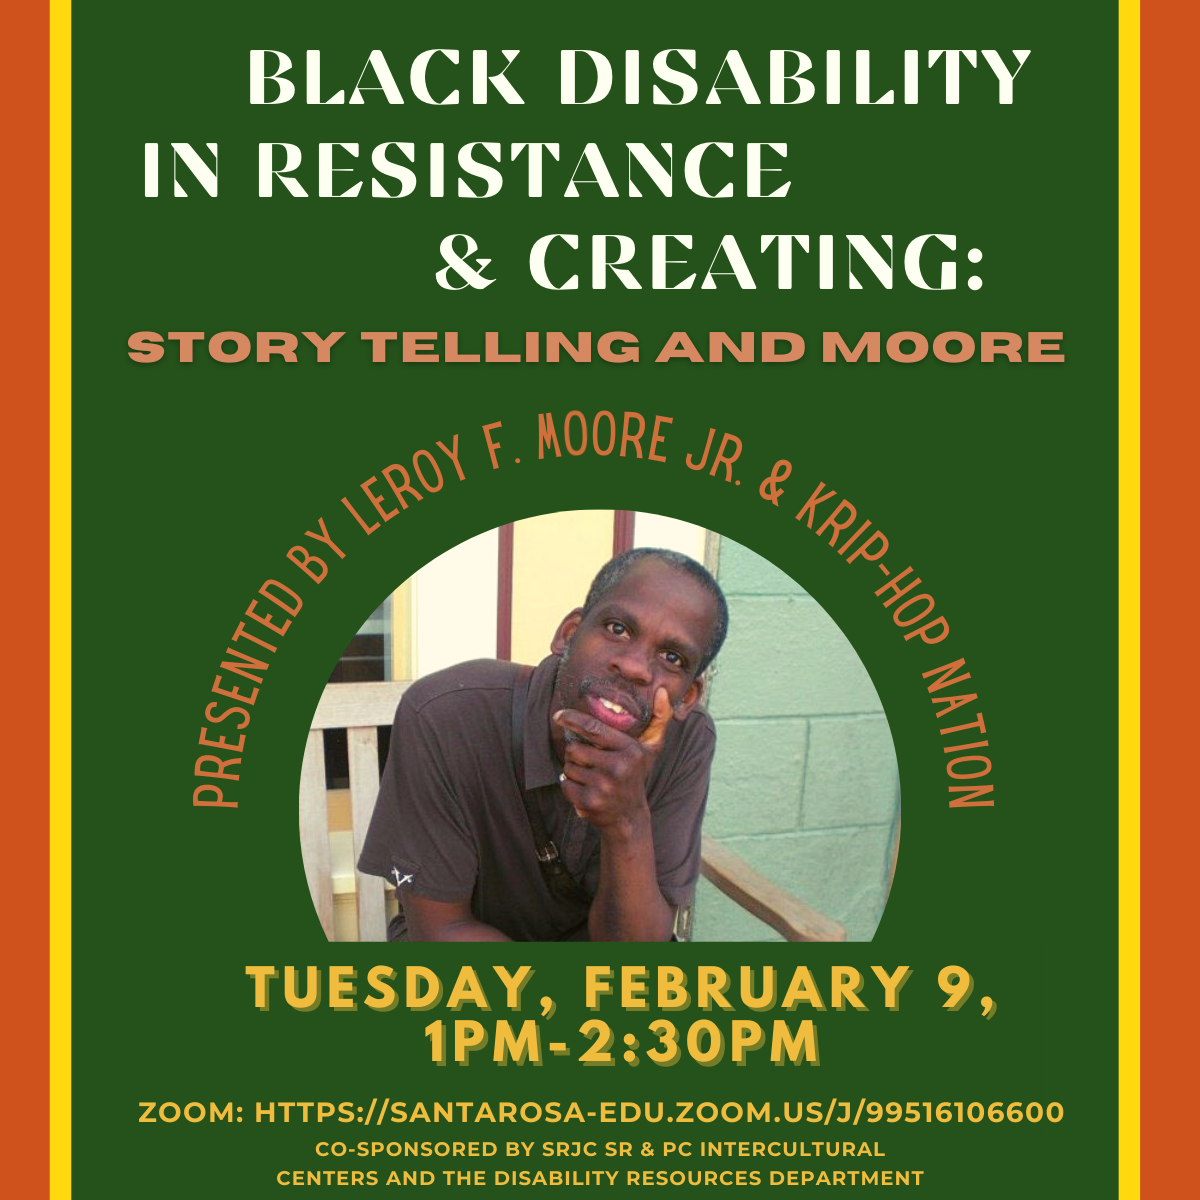 Black Disability in Resistance and Creating: Story Telling and Moore